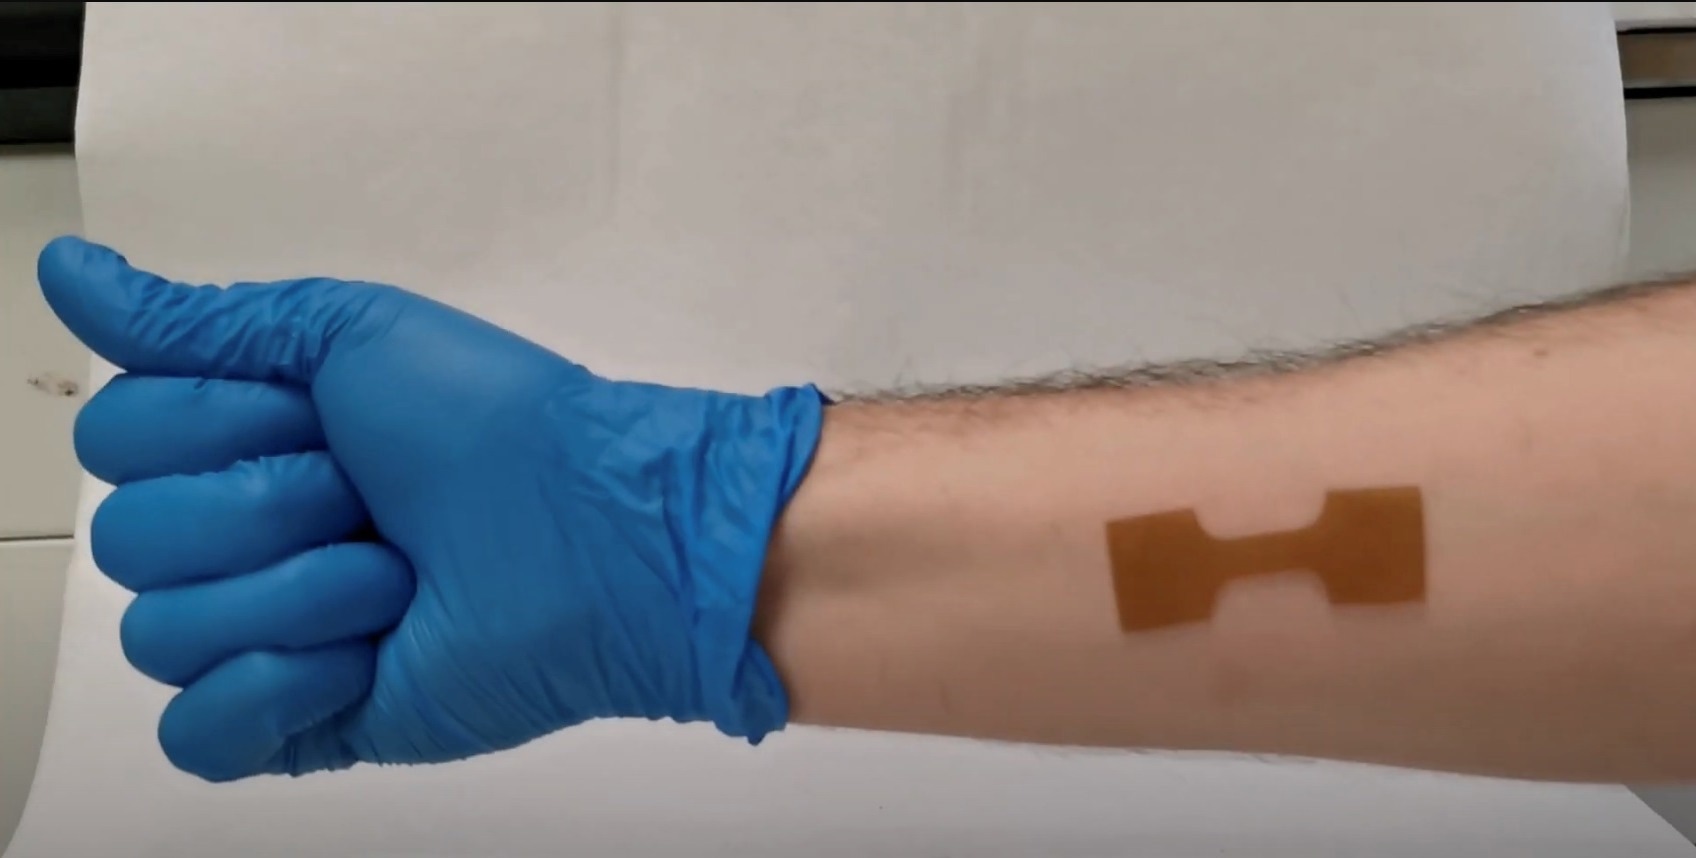 Intelligent wound dressing material could bring pain relief to burn patients